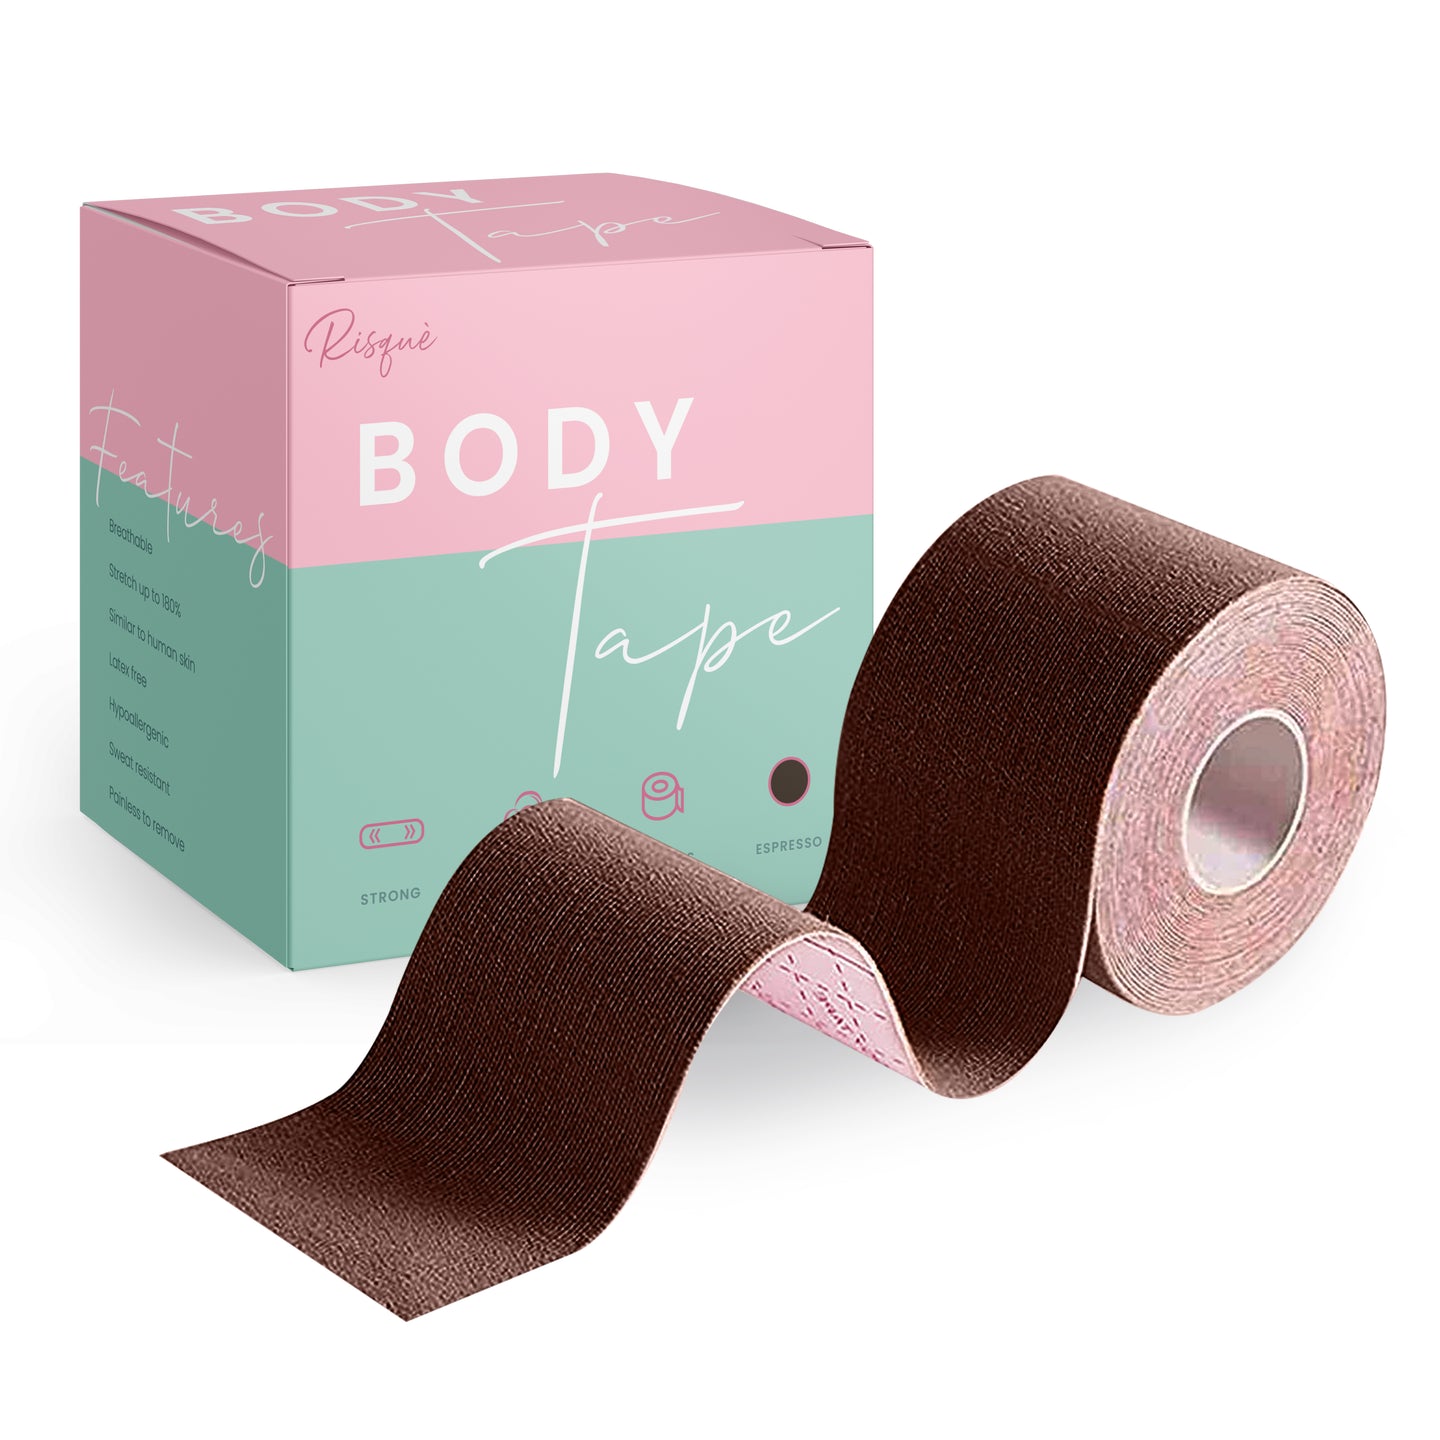 FINALLY!!! 💃Booby Tape is back yall! It can be worn many